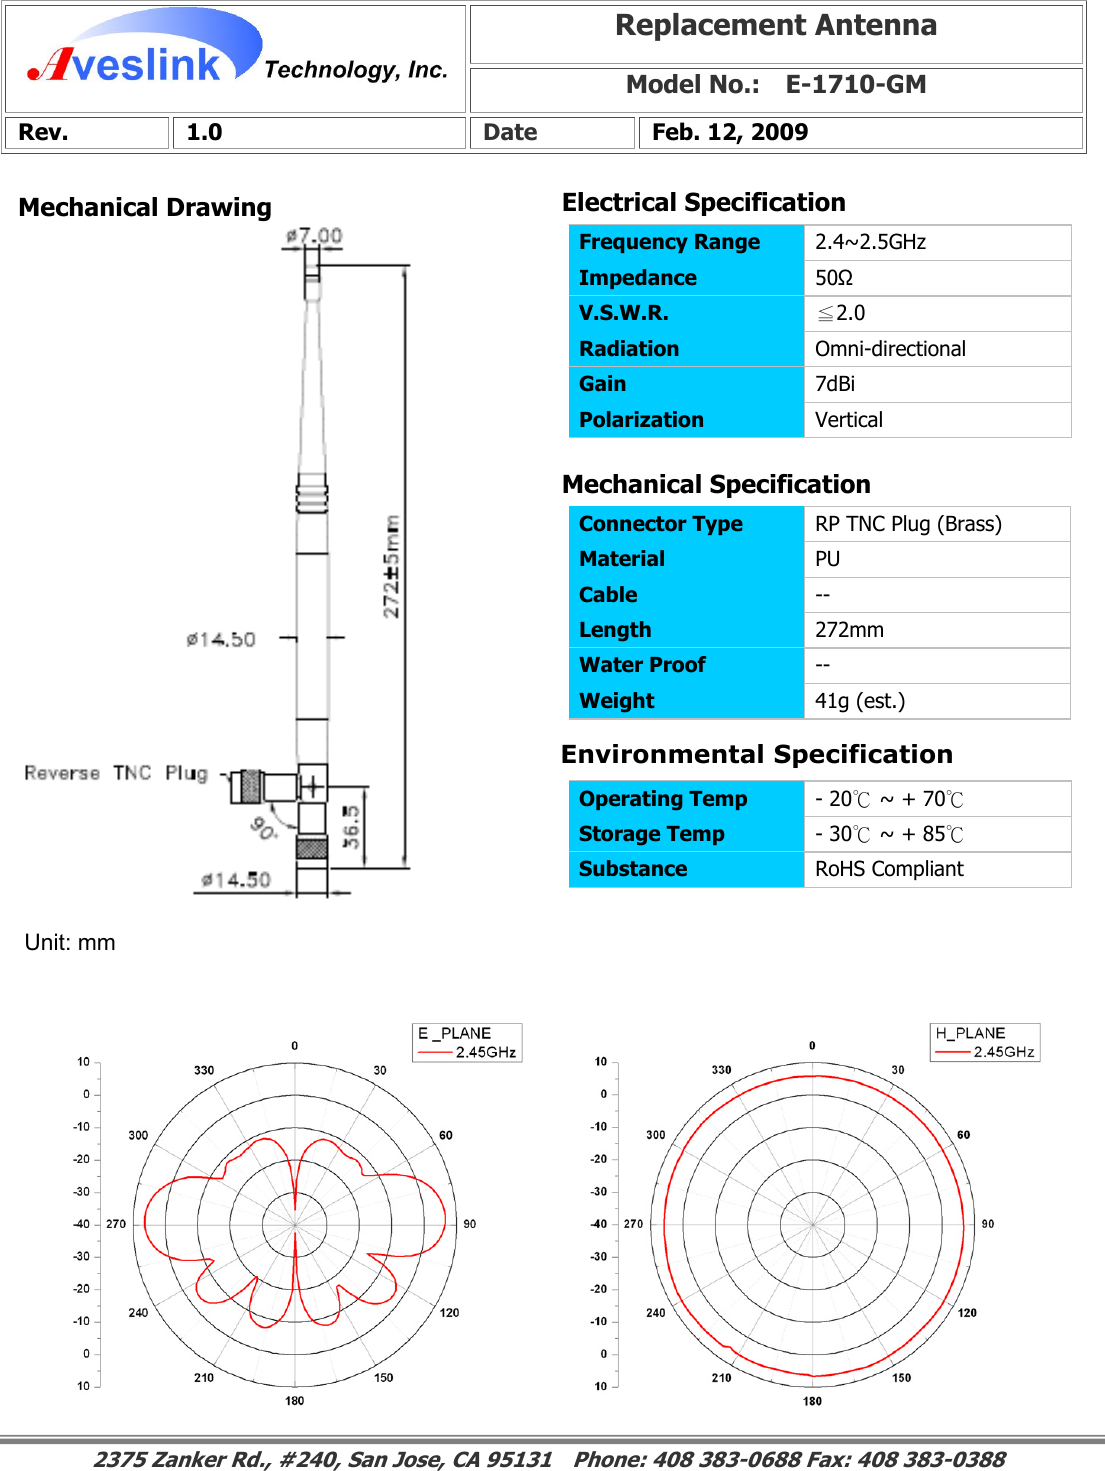 Mechanical Drawing Mechanical Specification Replacement Antenna Model No.:    E-1710-GMRev. 1.0  Date  Feb. 12, 2009 Connector Type    RP TNC Plug (Brass) Material  PU Cable  -- Length  272mm Water Proof  -- Weight  41g (est.)                                                                                                                                                                                                                     2375 Zanker Rd., #240, San Jose, CA 95131    Phone: 408 383-0688 Fax: 408 383-0388 Operating Temp  - 20℃ ~ + 70  ℃ Storage Temp  - 30℃ ~ + 85  ℃ Substance  RoHS Compliant Electrical Specification Frequency Range    2.4~2.5GHz Impedance  50Ω V.S.W.R.  2.0≦ Radiation  Omni-directional Gain  7dBi Polarization  Vertical   Unit: mm Environmental Specification 